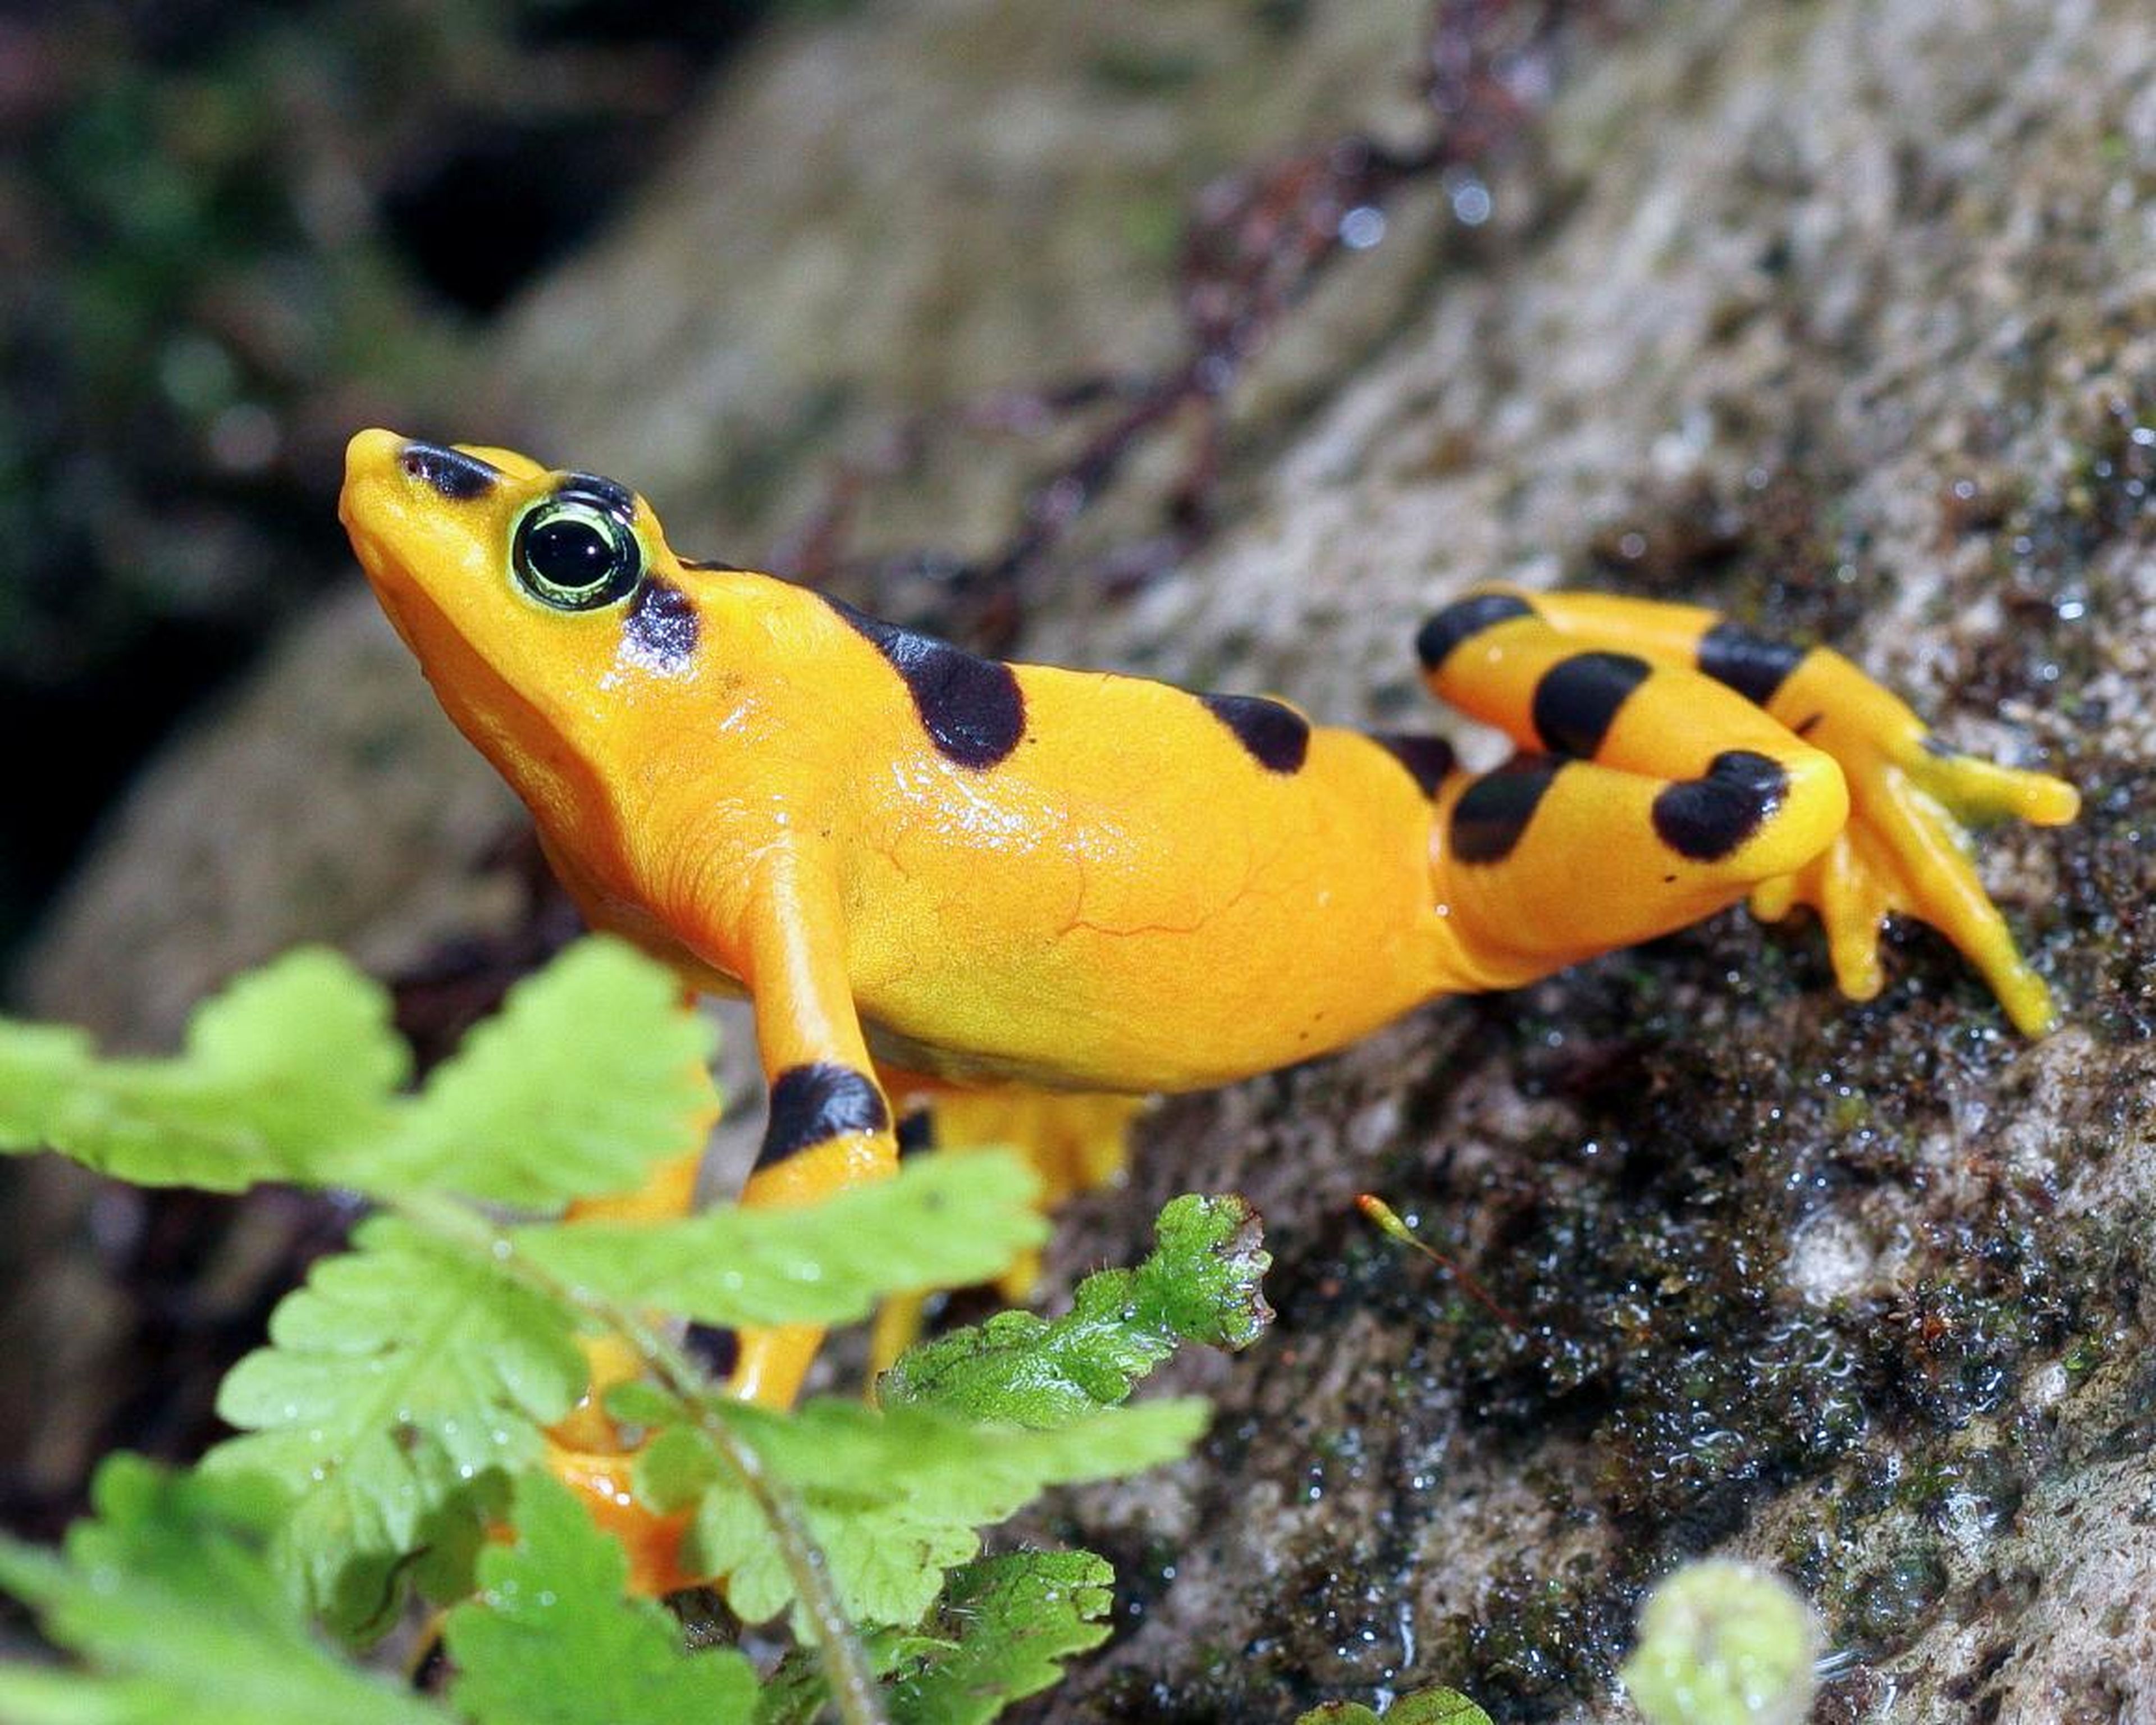 A Panamanian Golden Frog outside El Valle, Panama. Most Atelopus frogs experienced a 90% decline or complete extinction from the chytrid fungus.